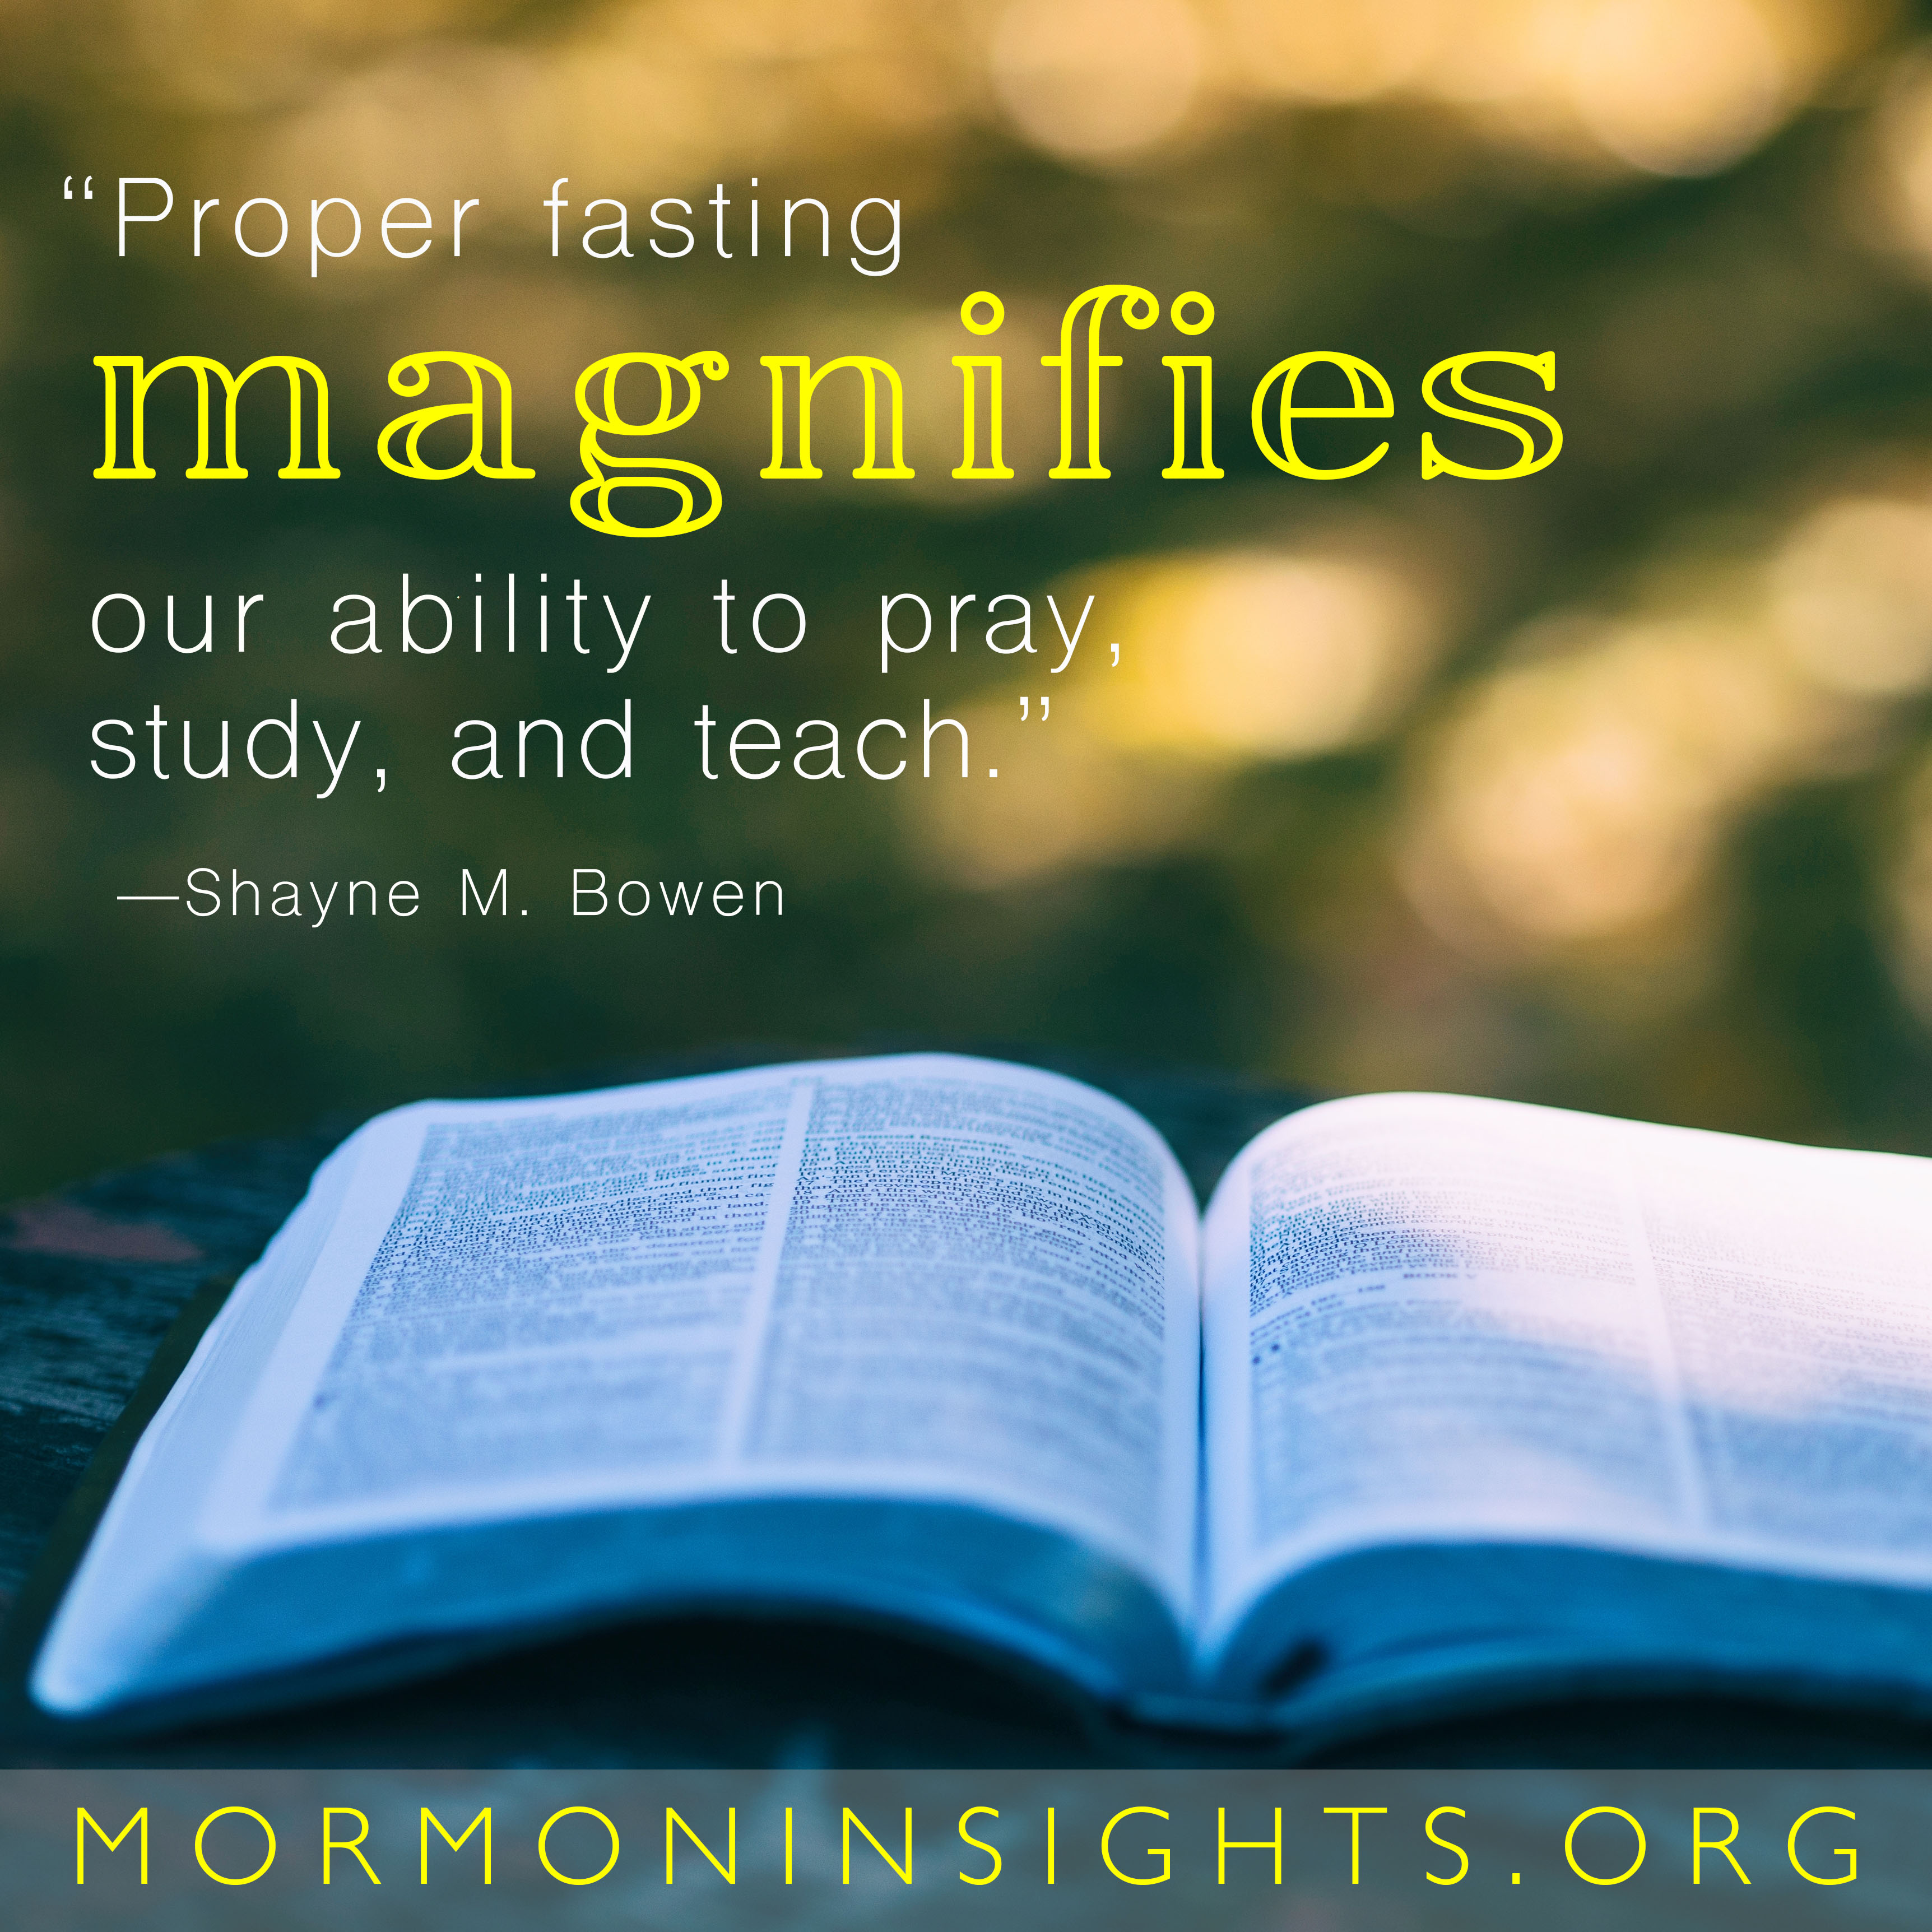 "Proper fasting magnifies our ability to pray, study, and teach." -Shayne M. Bowen